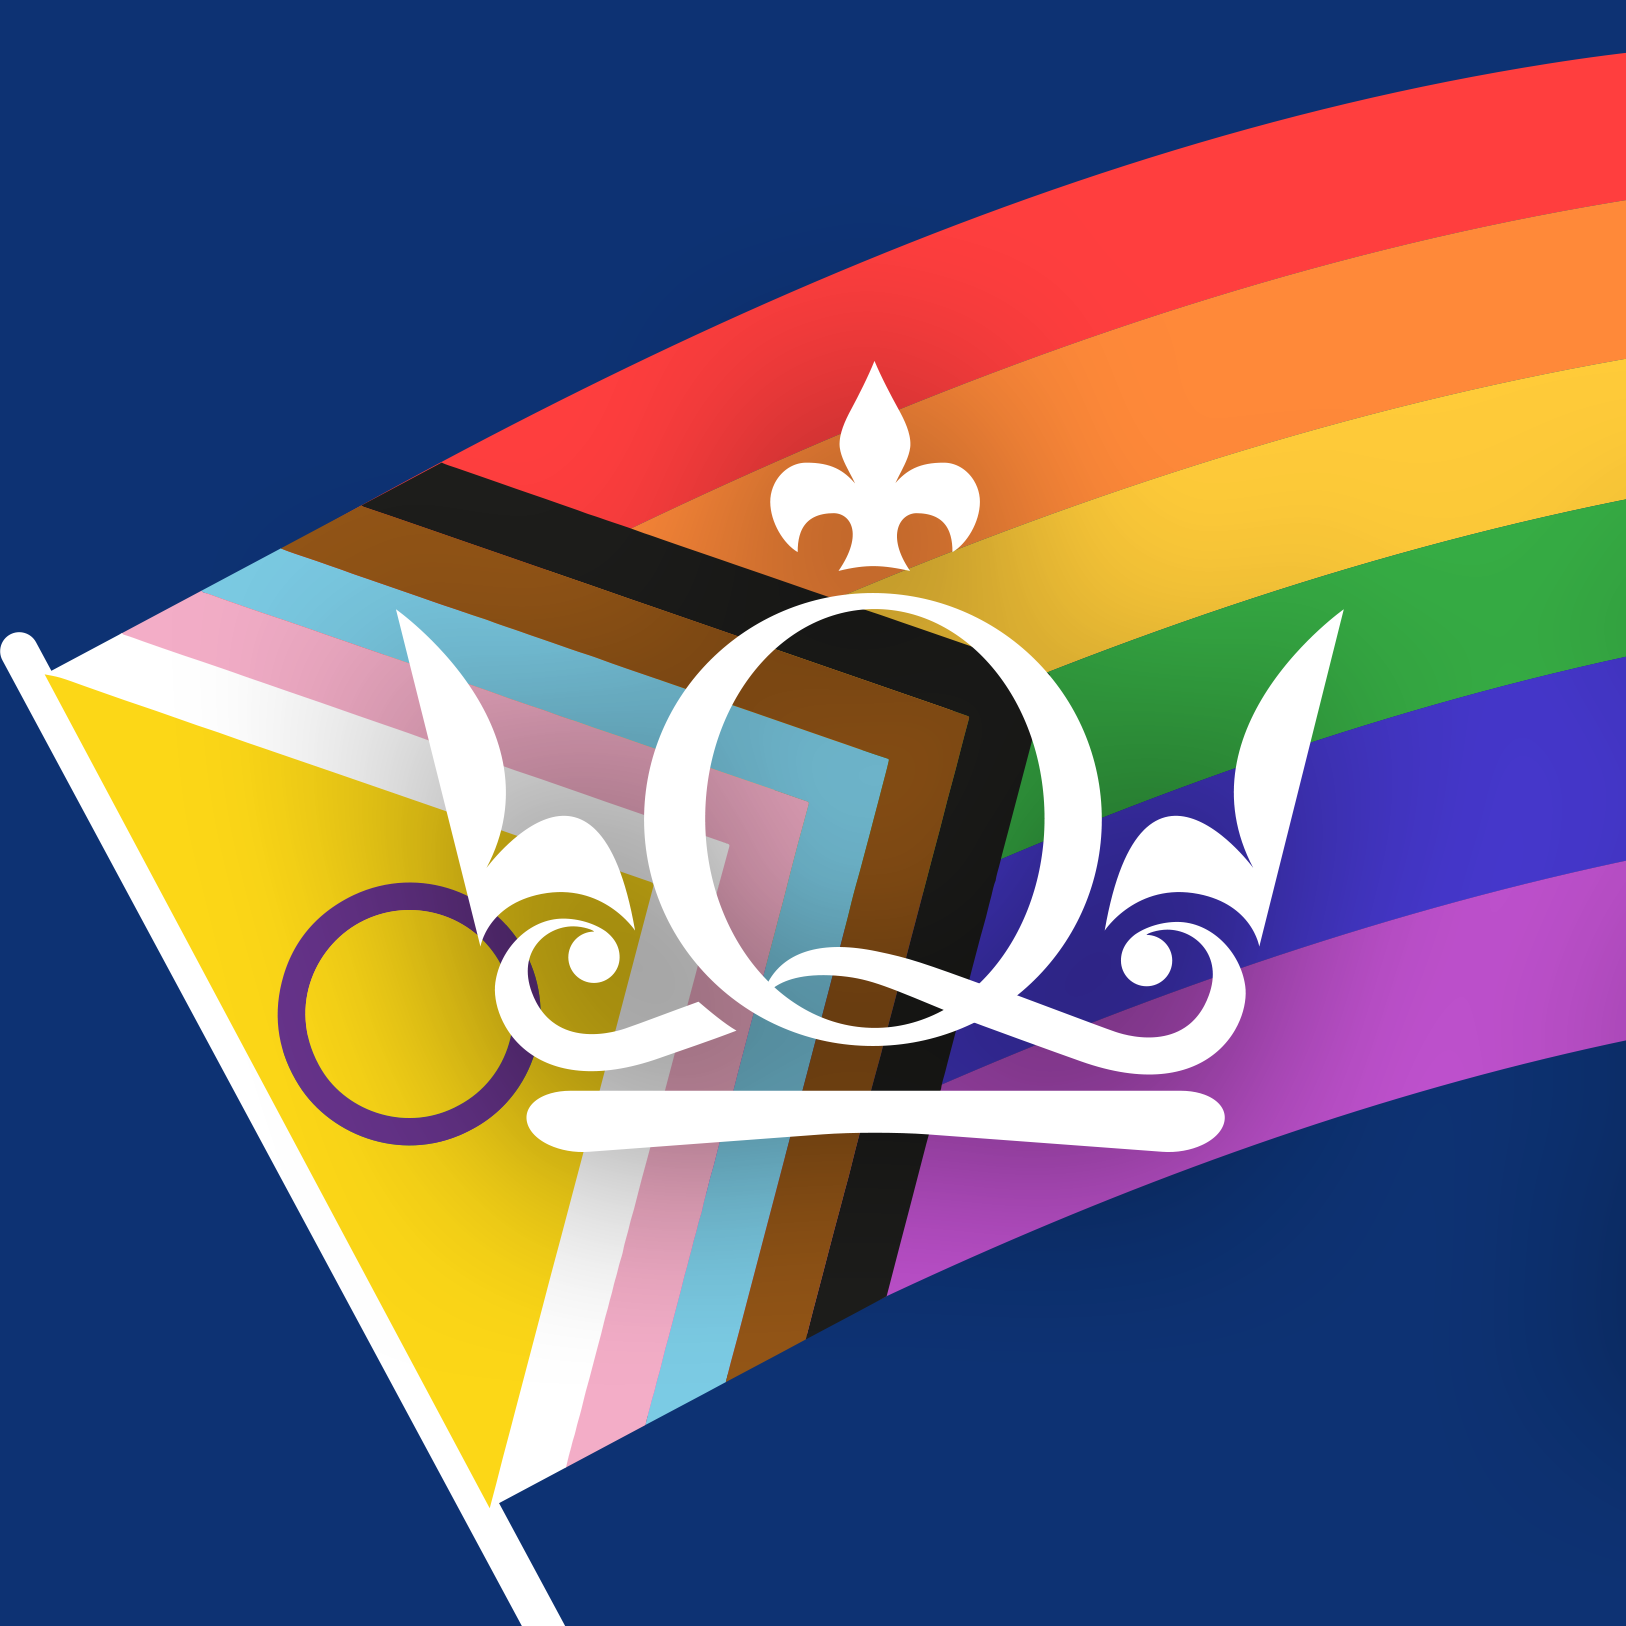 An intersex inclusive Progress Pride flag on a blue background, overlaid with a white Queen Mary crown logo